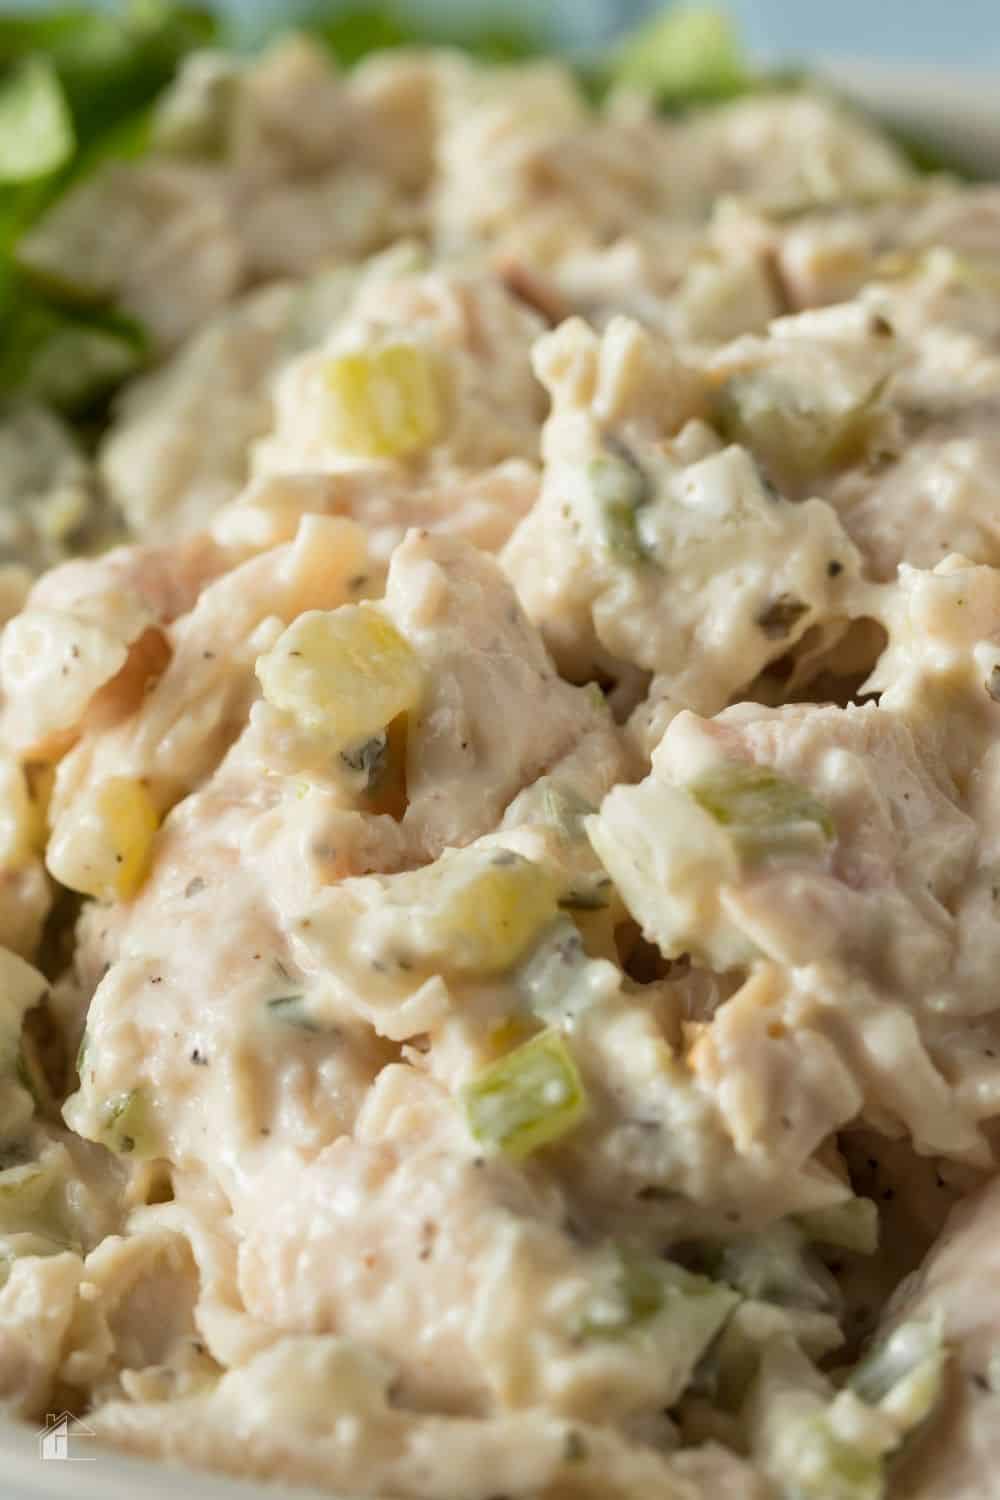 This easy chicken salad recipe is made with cooked chicken, celery, hard-boiled egg, relish, mayo, and Greek seasoning. #chickensalad #easychickensalad #salad #chickenrecipe via @mystayathome